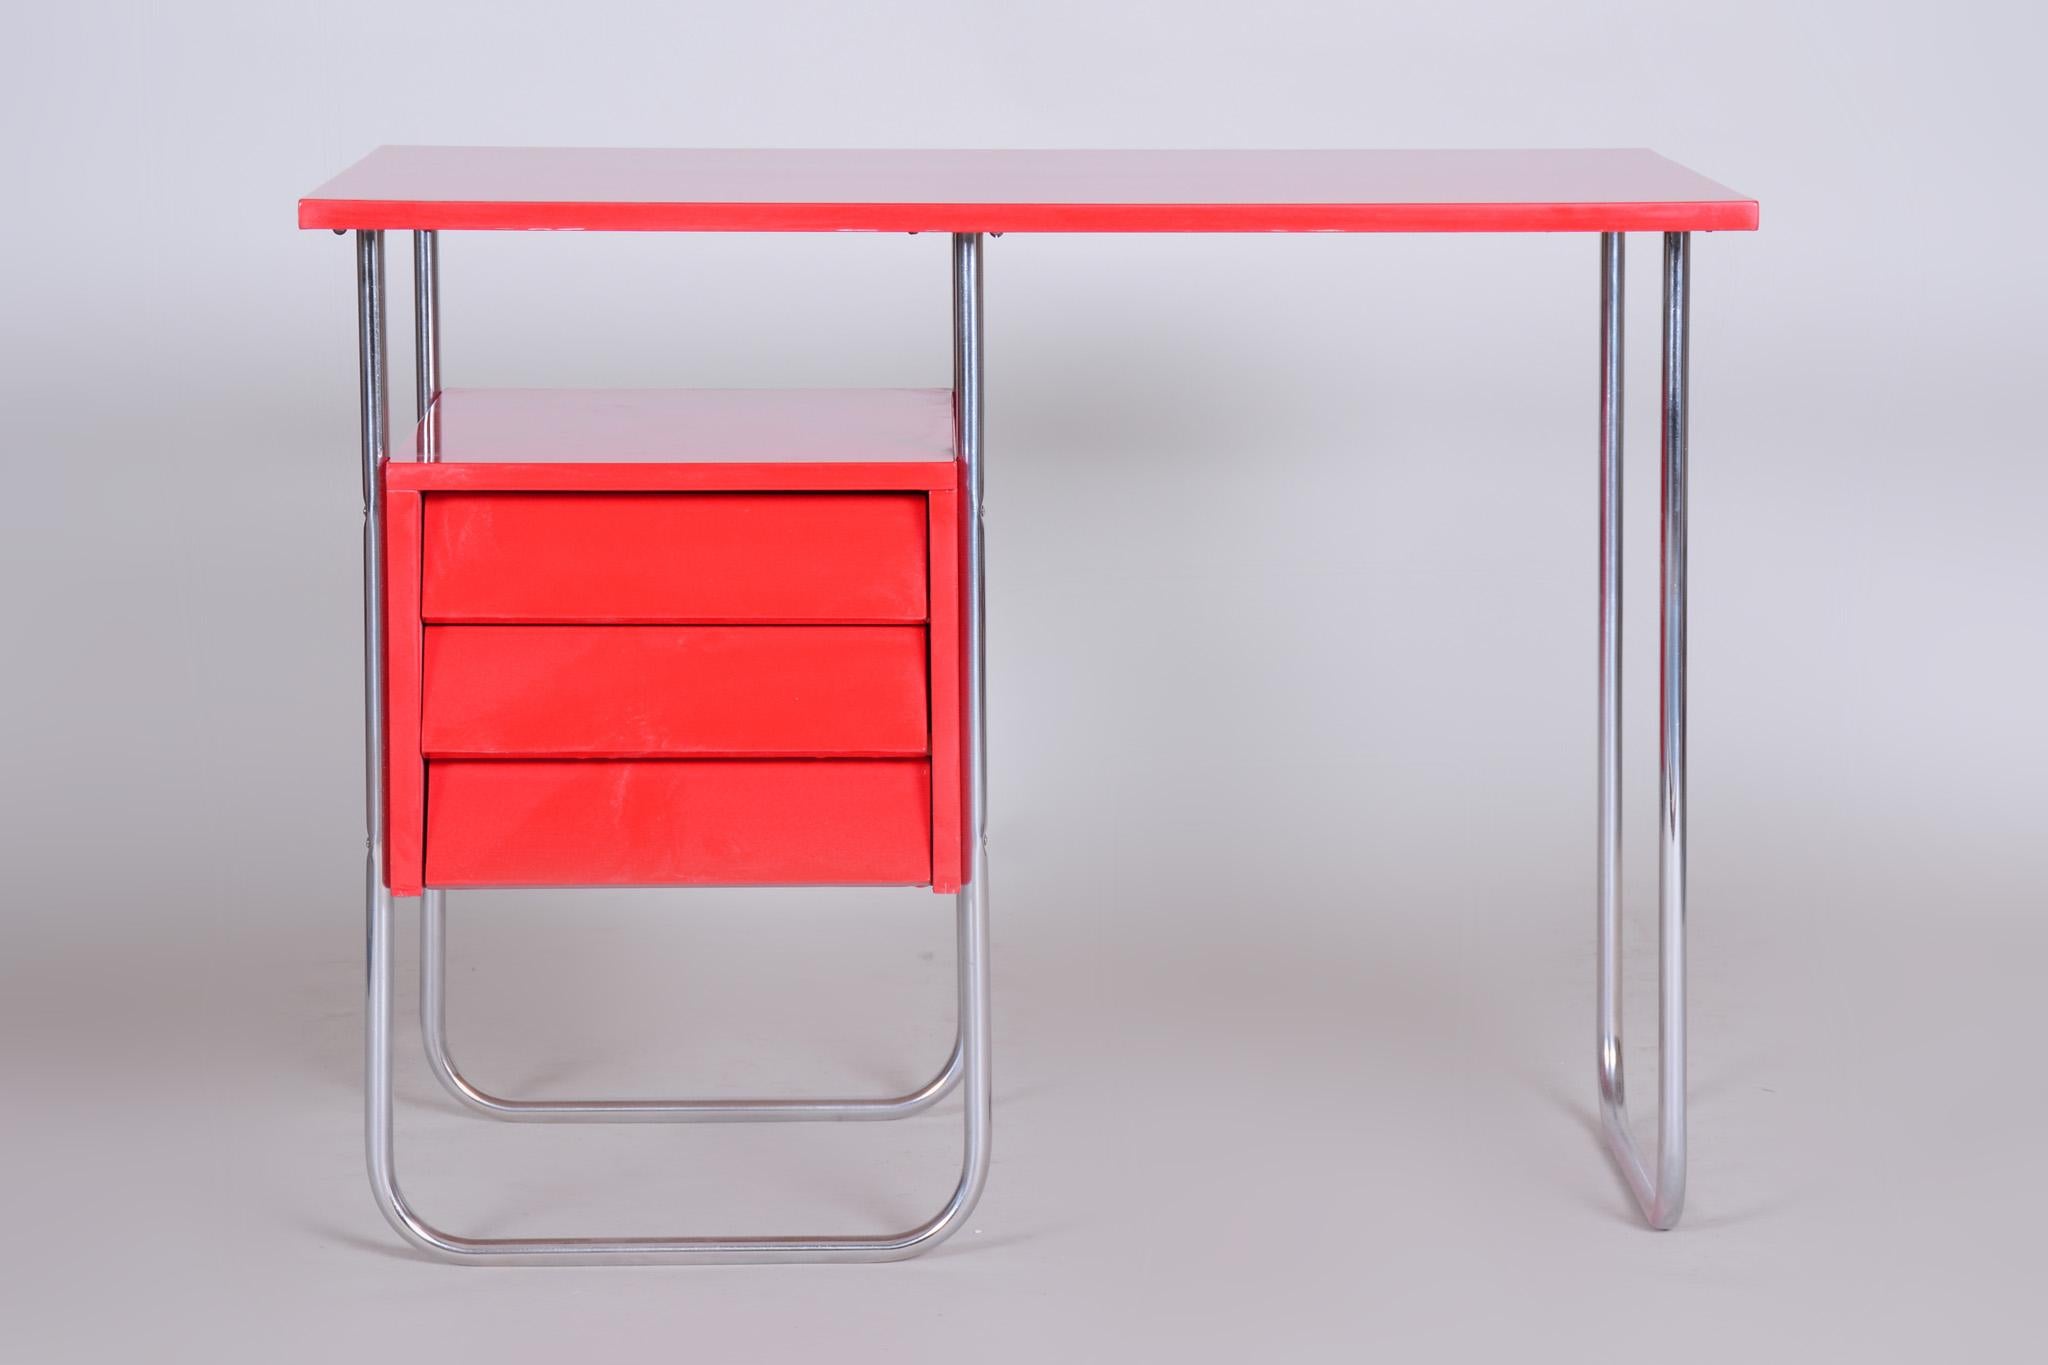 Bauhaus Completely Restored Red Functionalism Chrome Writing Desk, Czechia, 1940s